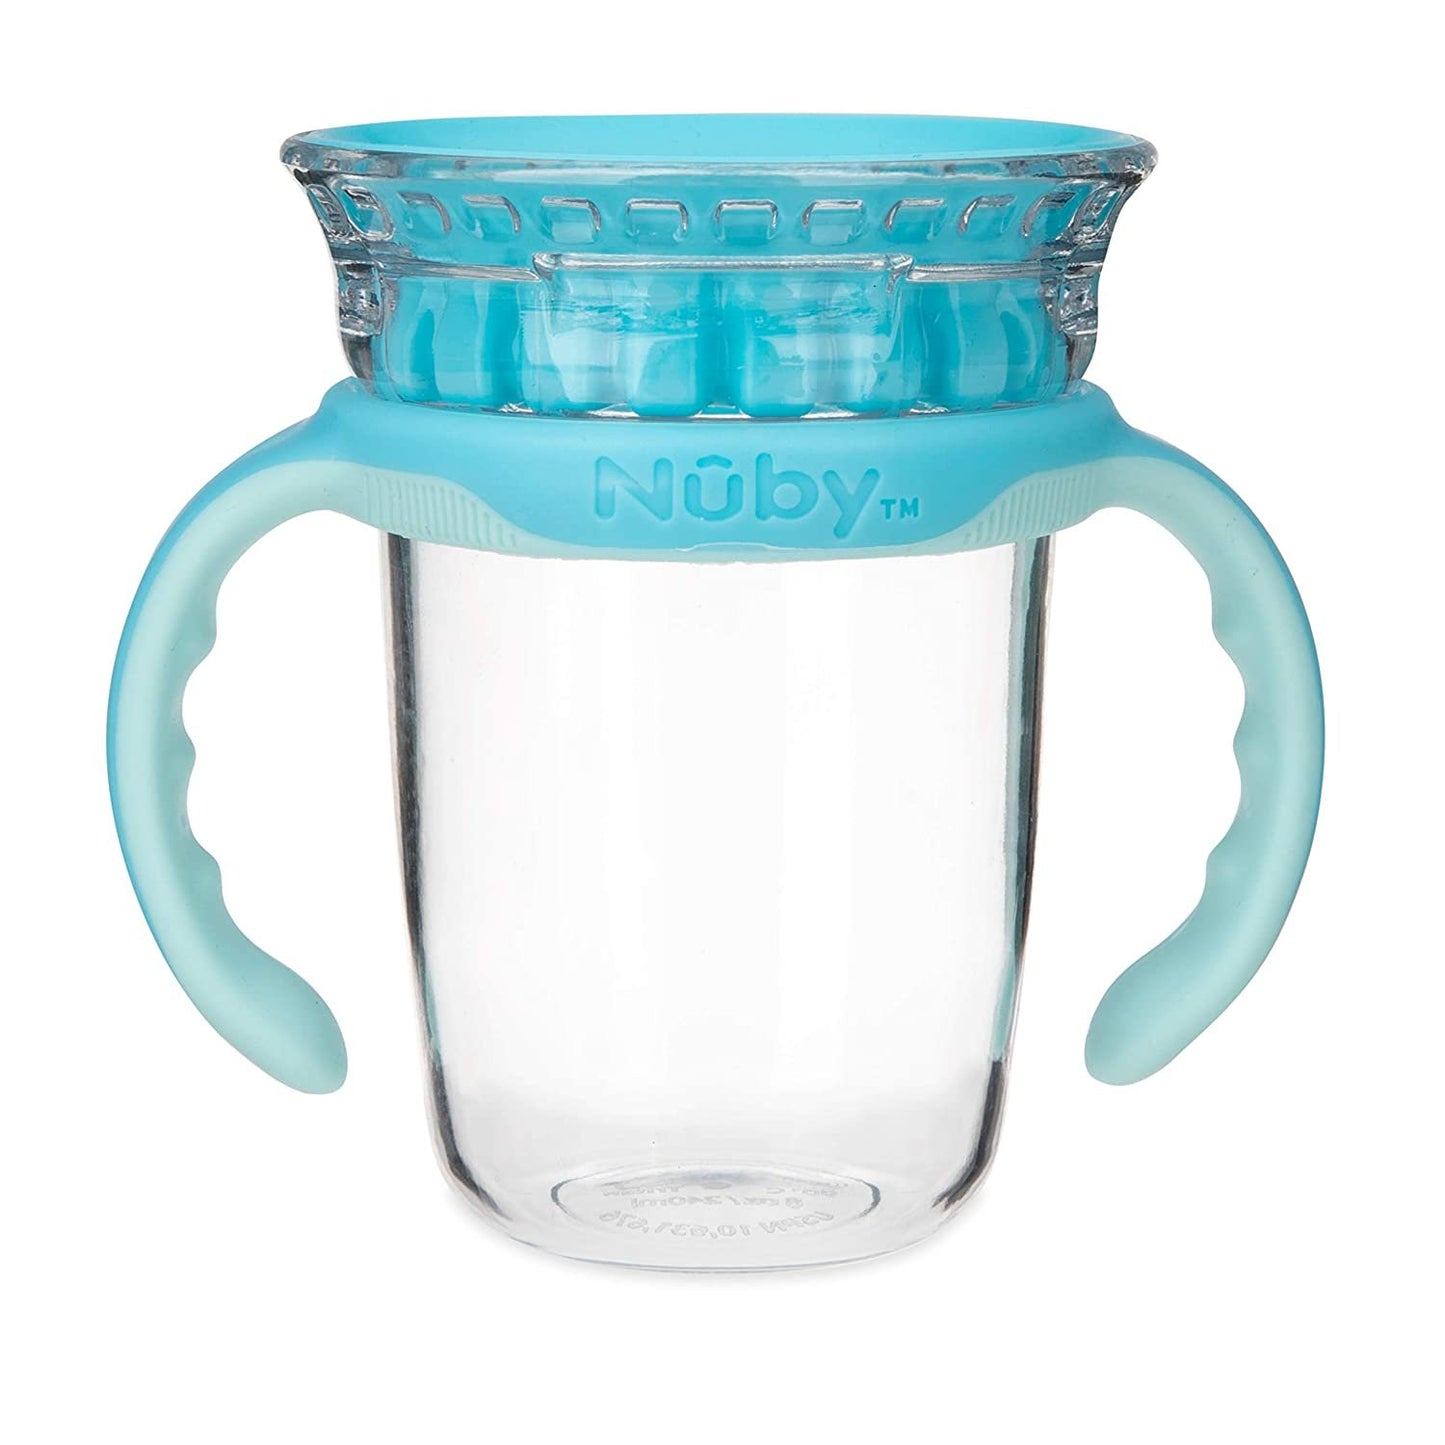 Luv N Care/NUBY Nuby 360 Edge 2 Stage Drinking Rim Cup with Removable Handles & hygienic Cover: 8 Oz/ 240 Ml, 12M+, Aqua 80661